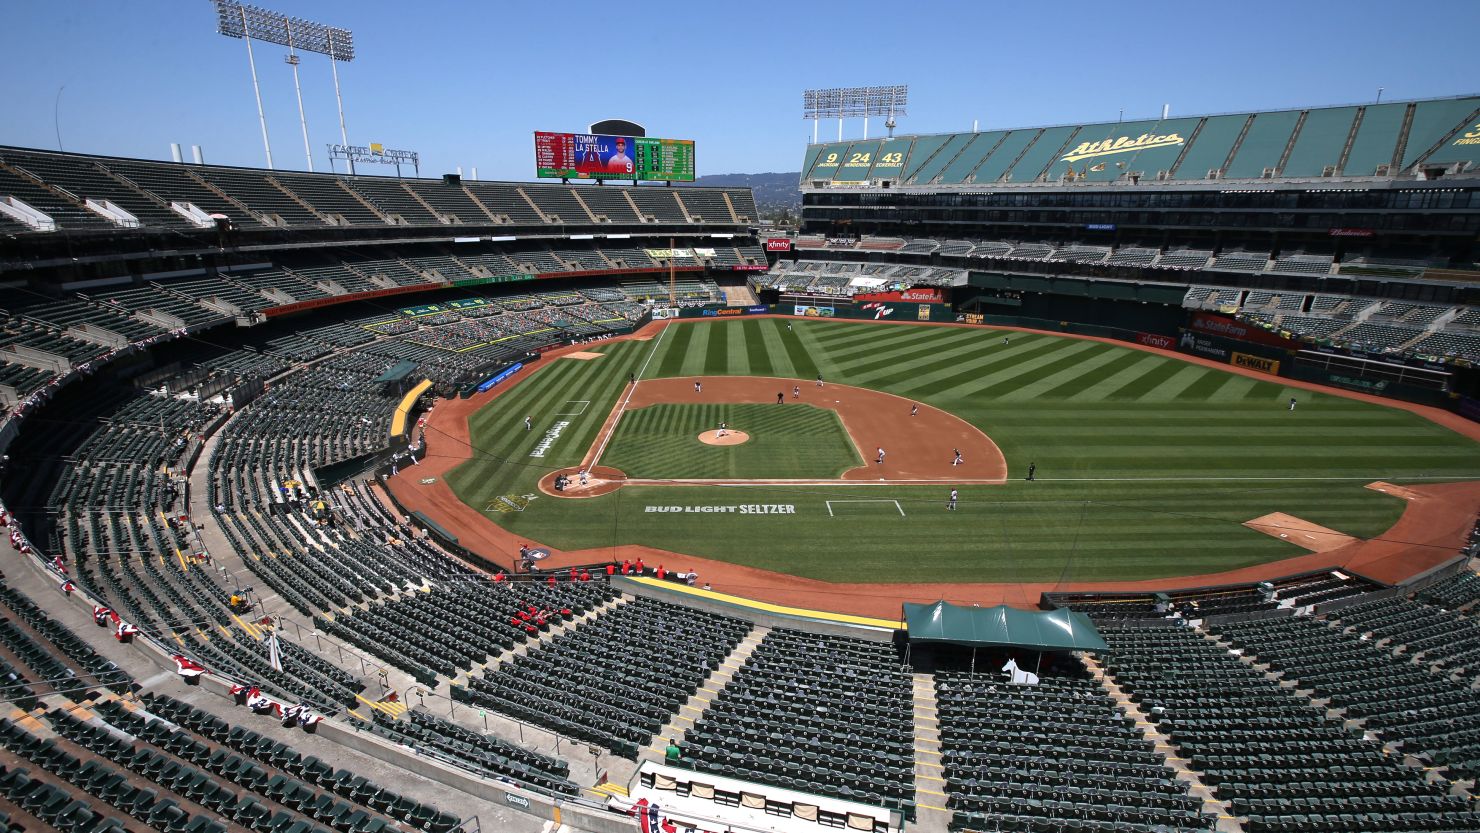 Baseball: Overall aerial view of RingCentral Coliseum during Oakland Athletics vs Los Angeles Angels game.
Oakland, CA 7/26/2020
CREDIT: Brad Mangin (Photo by Brad Mangin /Sports Illustrated via Getty Images)
(Set Number: X163299 TK1 )